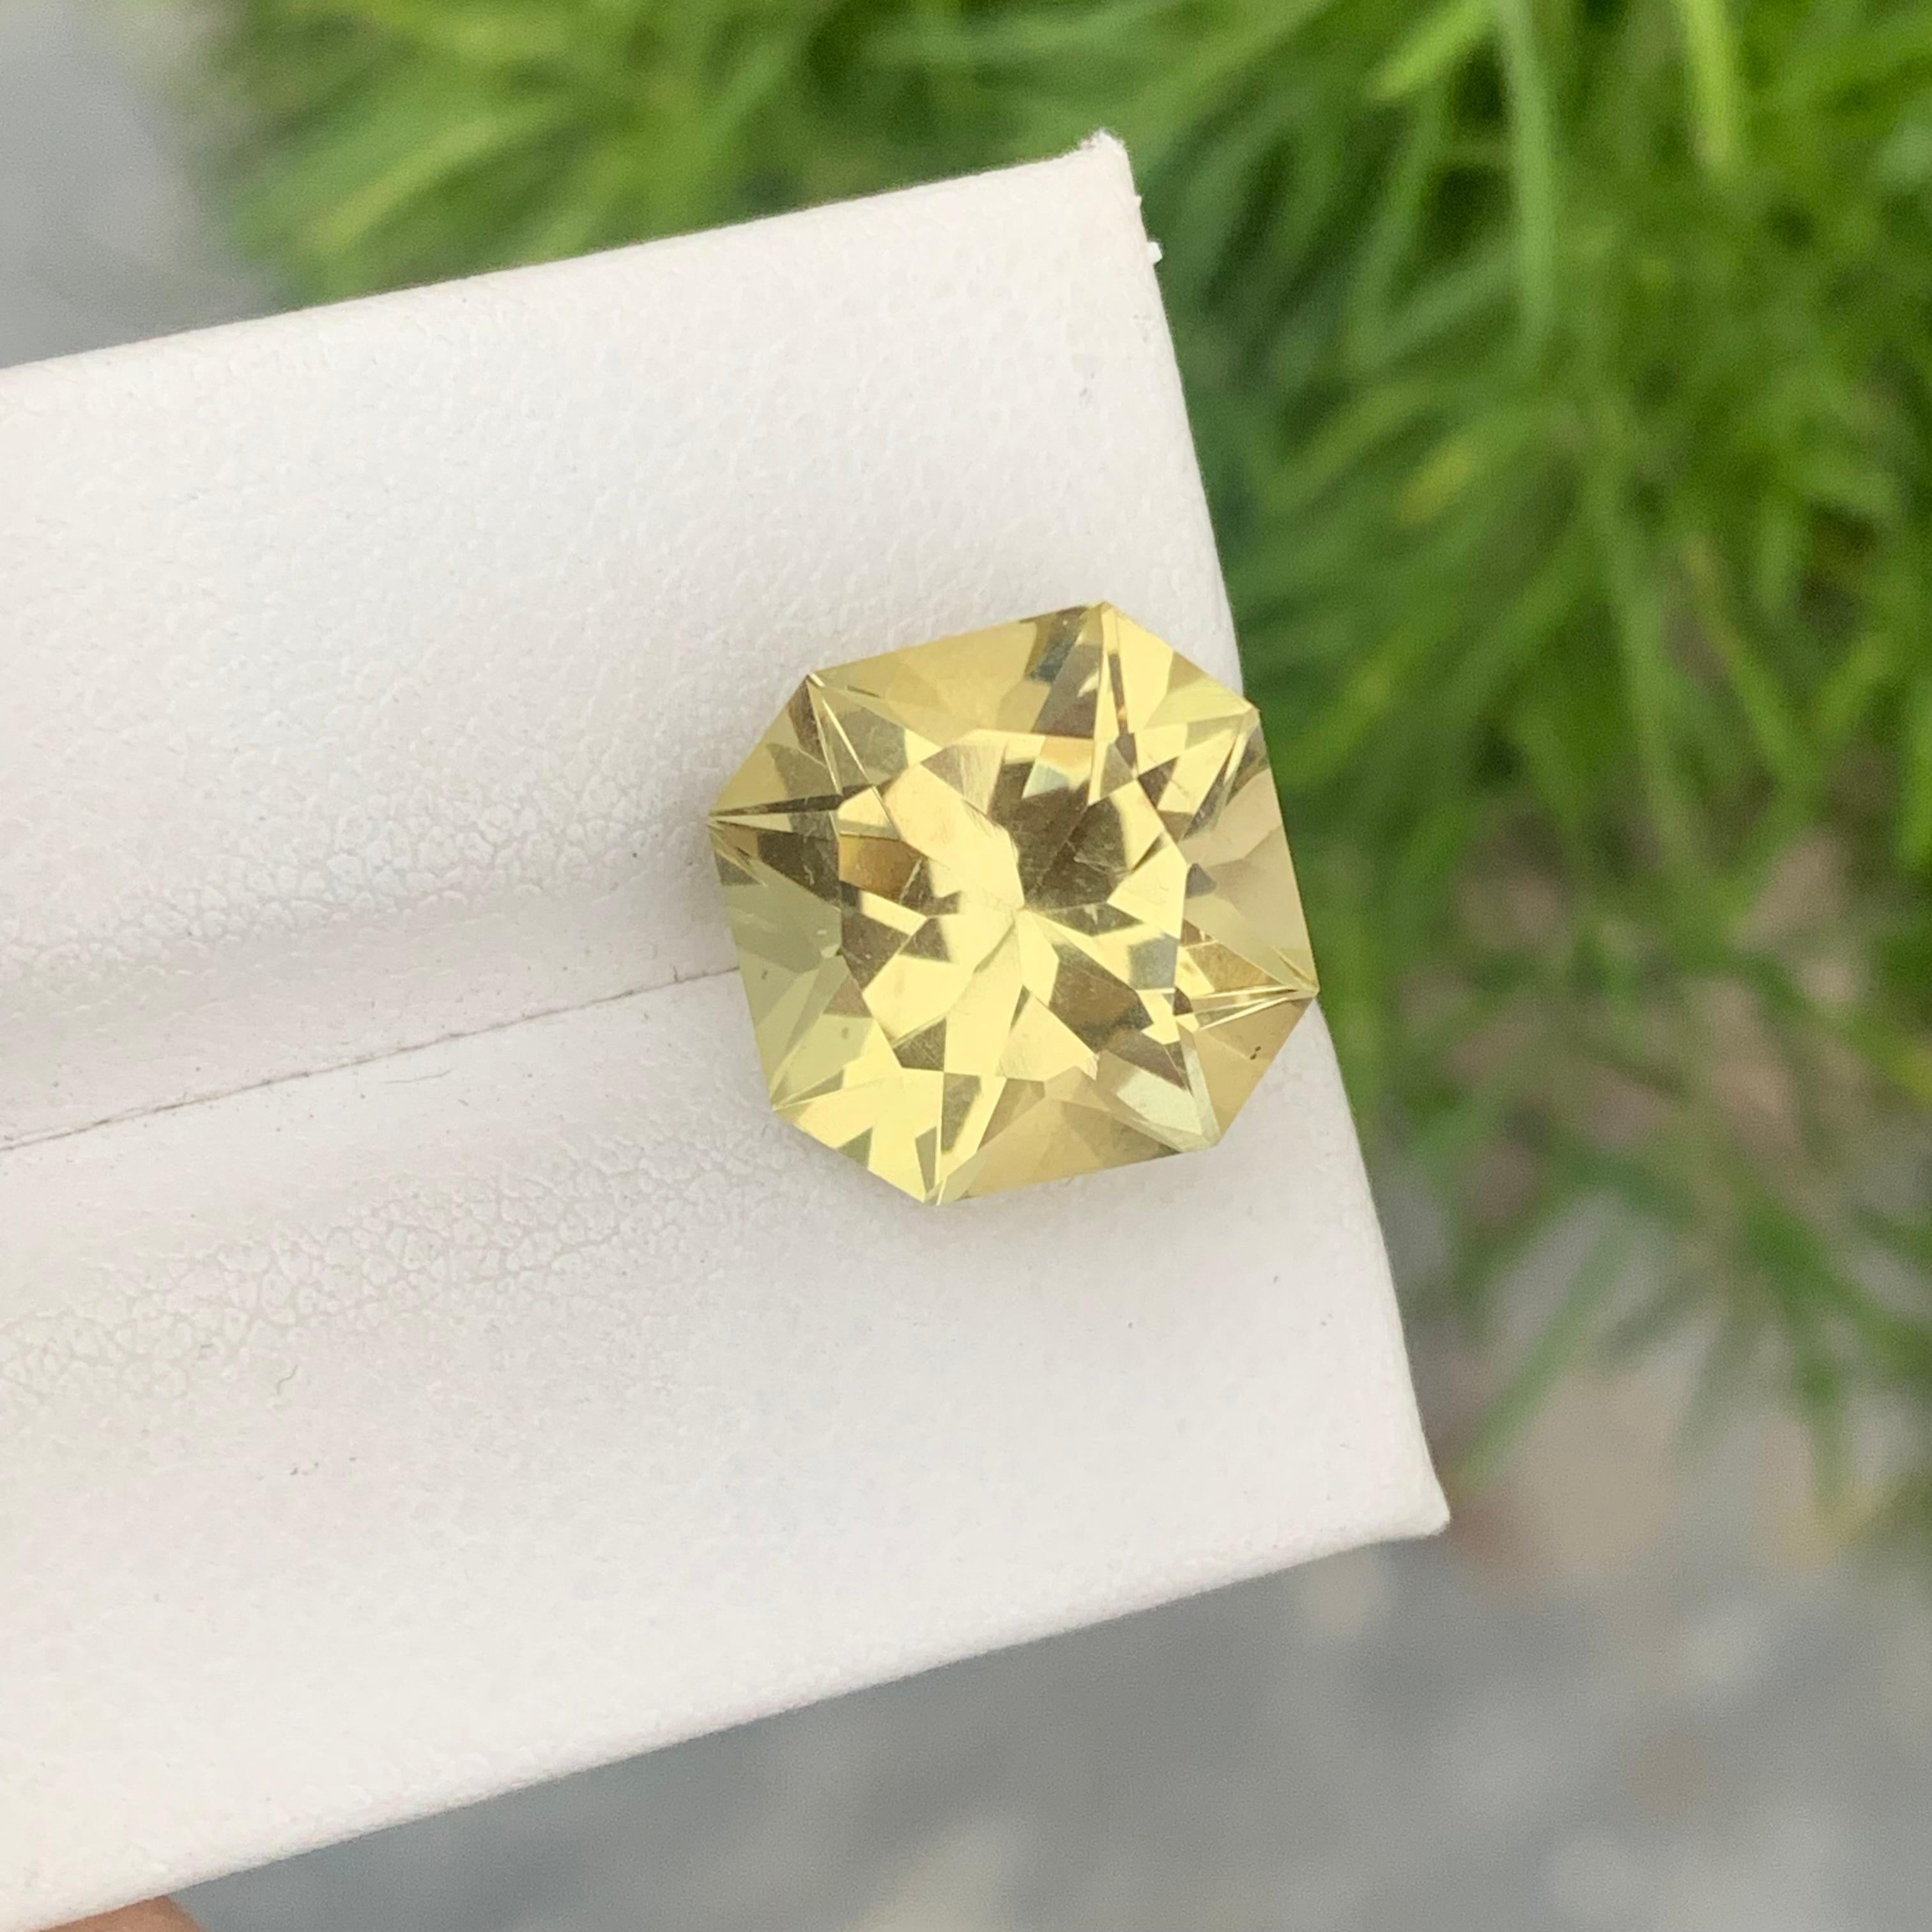 Gemstone Type : Lemon Quartz
Weight : 7.10 Carats
Dimensions : 12.2x12.1x8.6 Mm
Origin : Brazil
Clarity : Eye Clean
Cut: Precision Cut
Color: Yellow
Certificate: On Demand
This sensitive tone not only works well in female jewellery but also suits